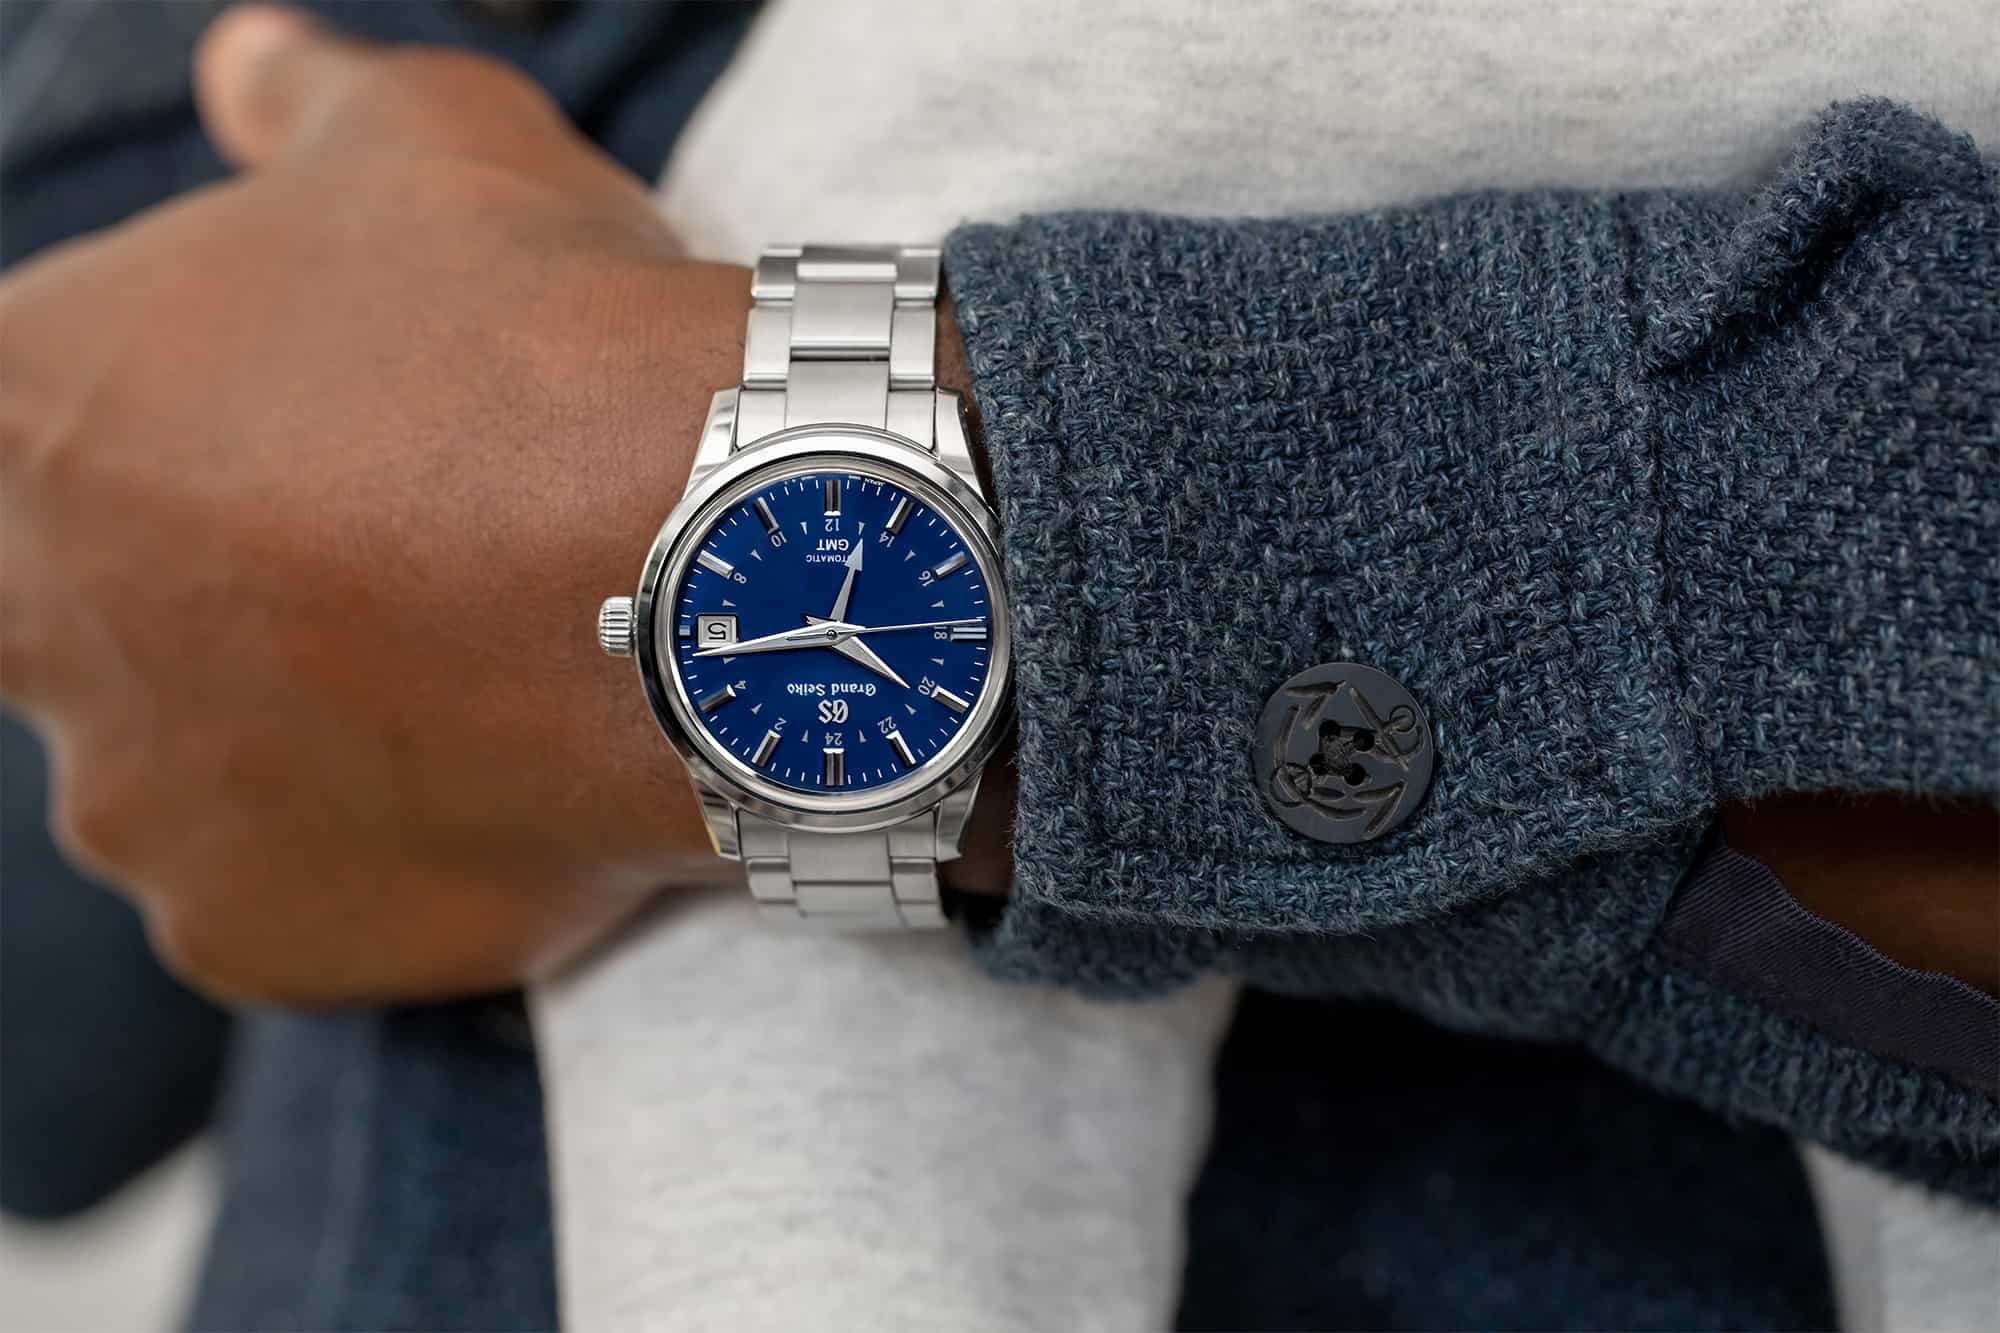 Hodinkee Teams Up With Grand Seiko for a New on a Favorite GMT Worn & Wound